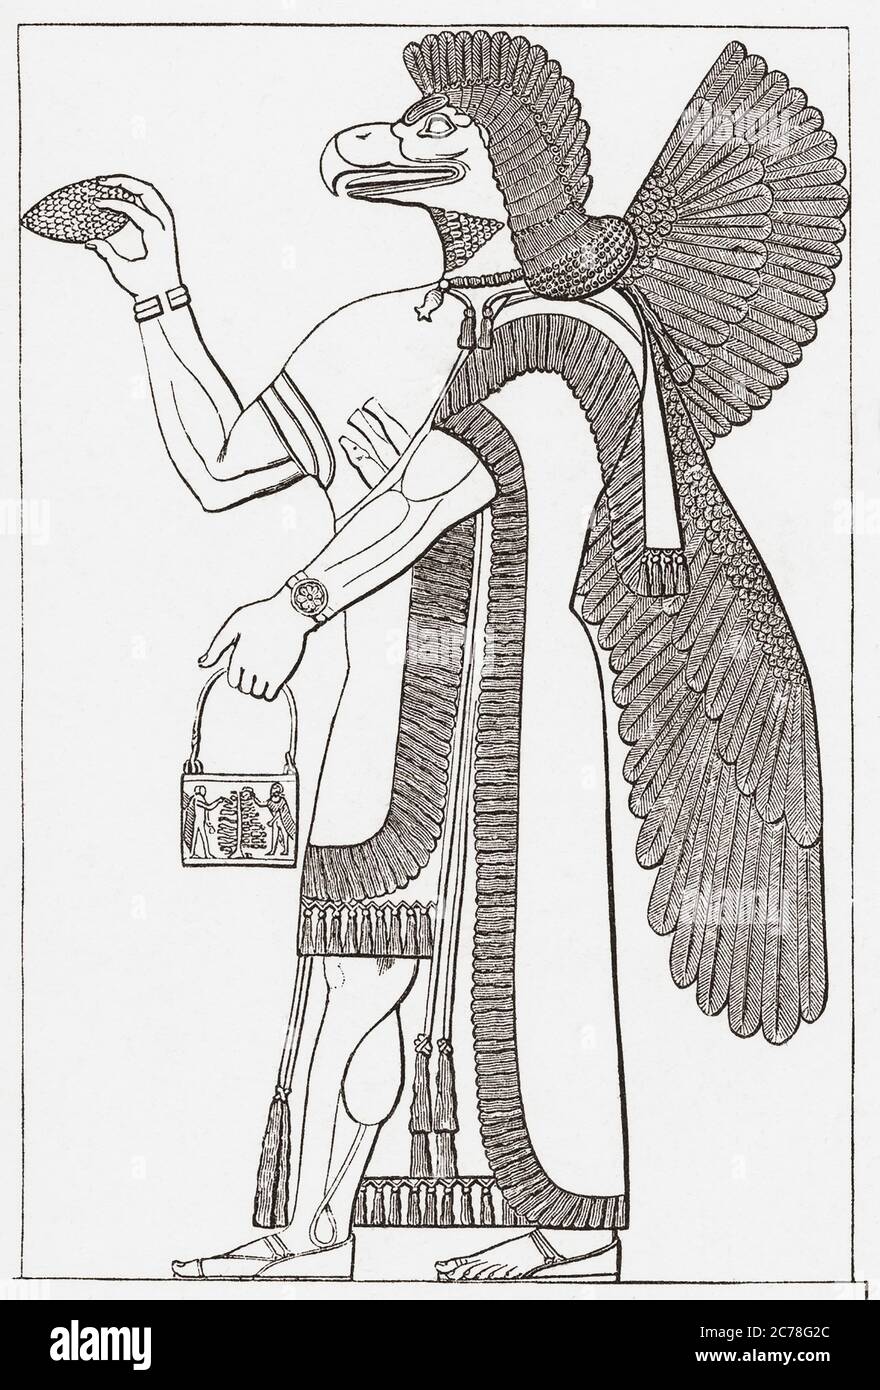 Eagle-headed deity.  Illustration by an unidentified 19th century artist based on a bas-relief from the North West Palace of Ashurnasirpal, Nimrud, Iraq dating from the Neo-Assyrian period.  The original is now in the Los Angeles County Museum. Stock Photo